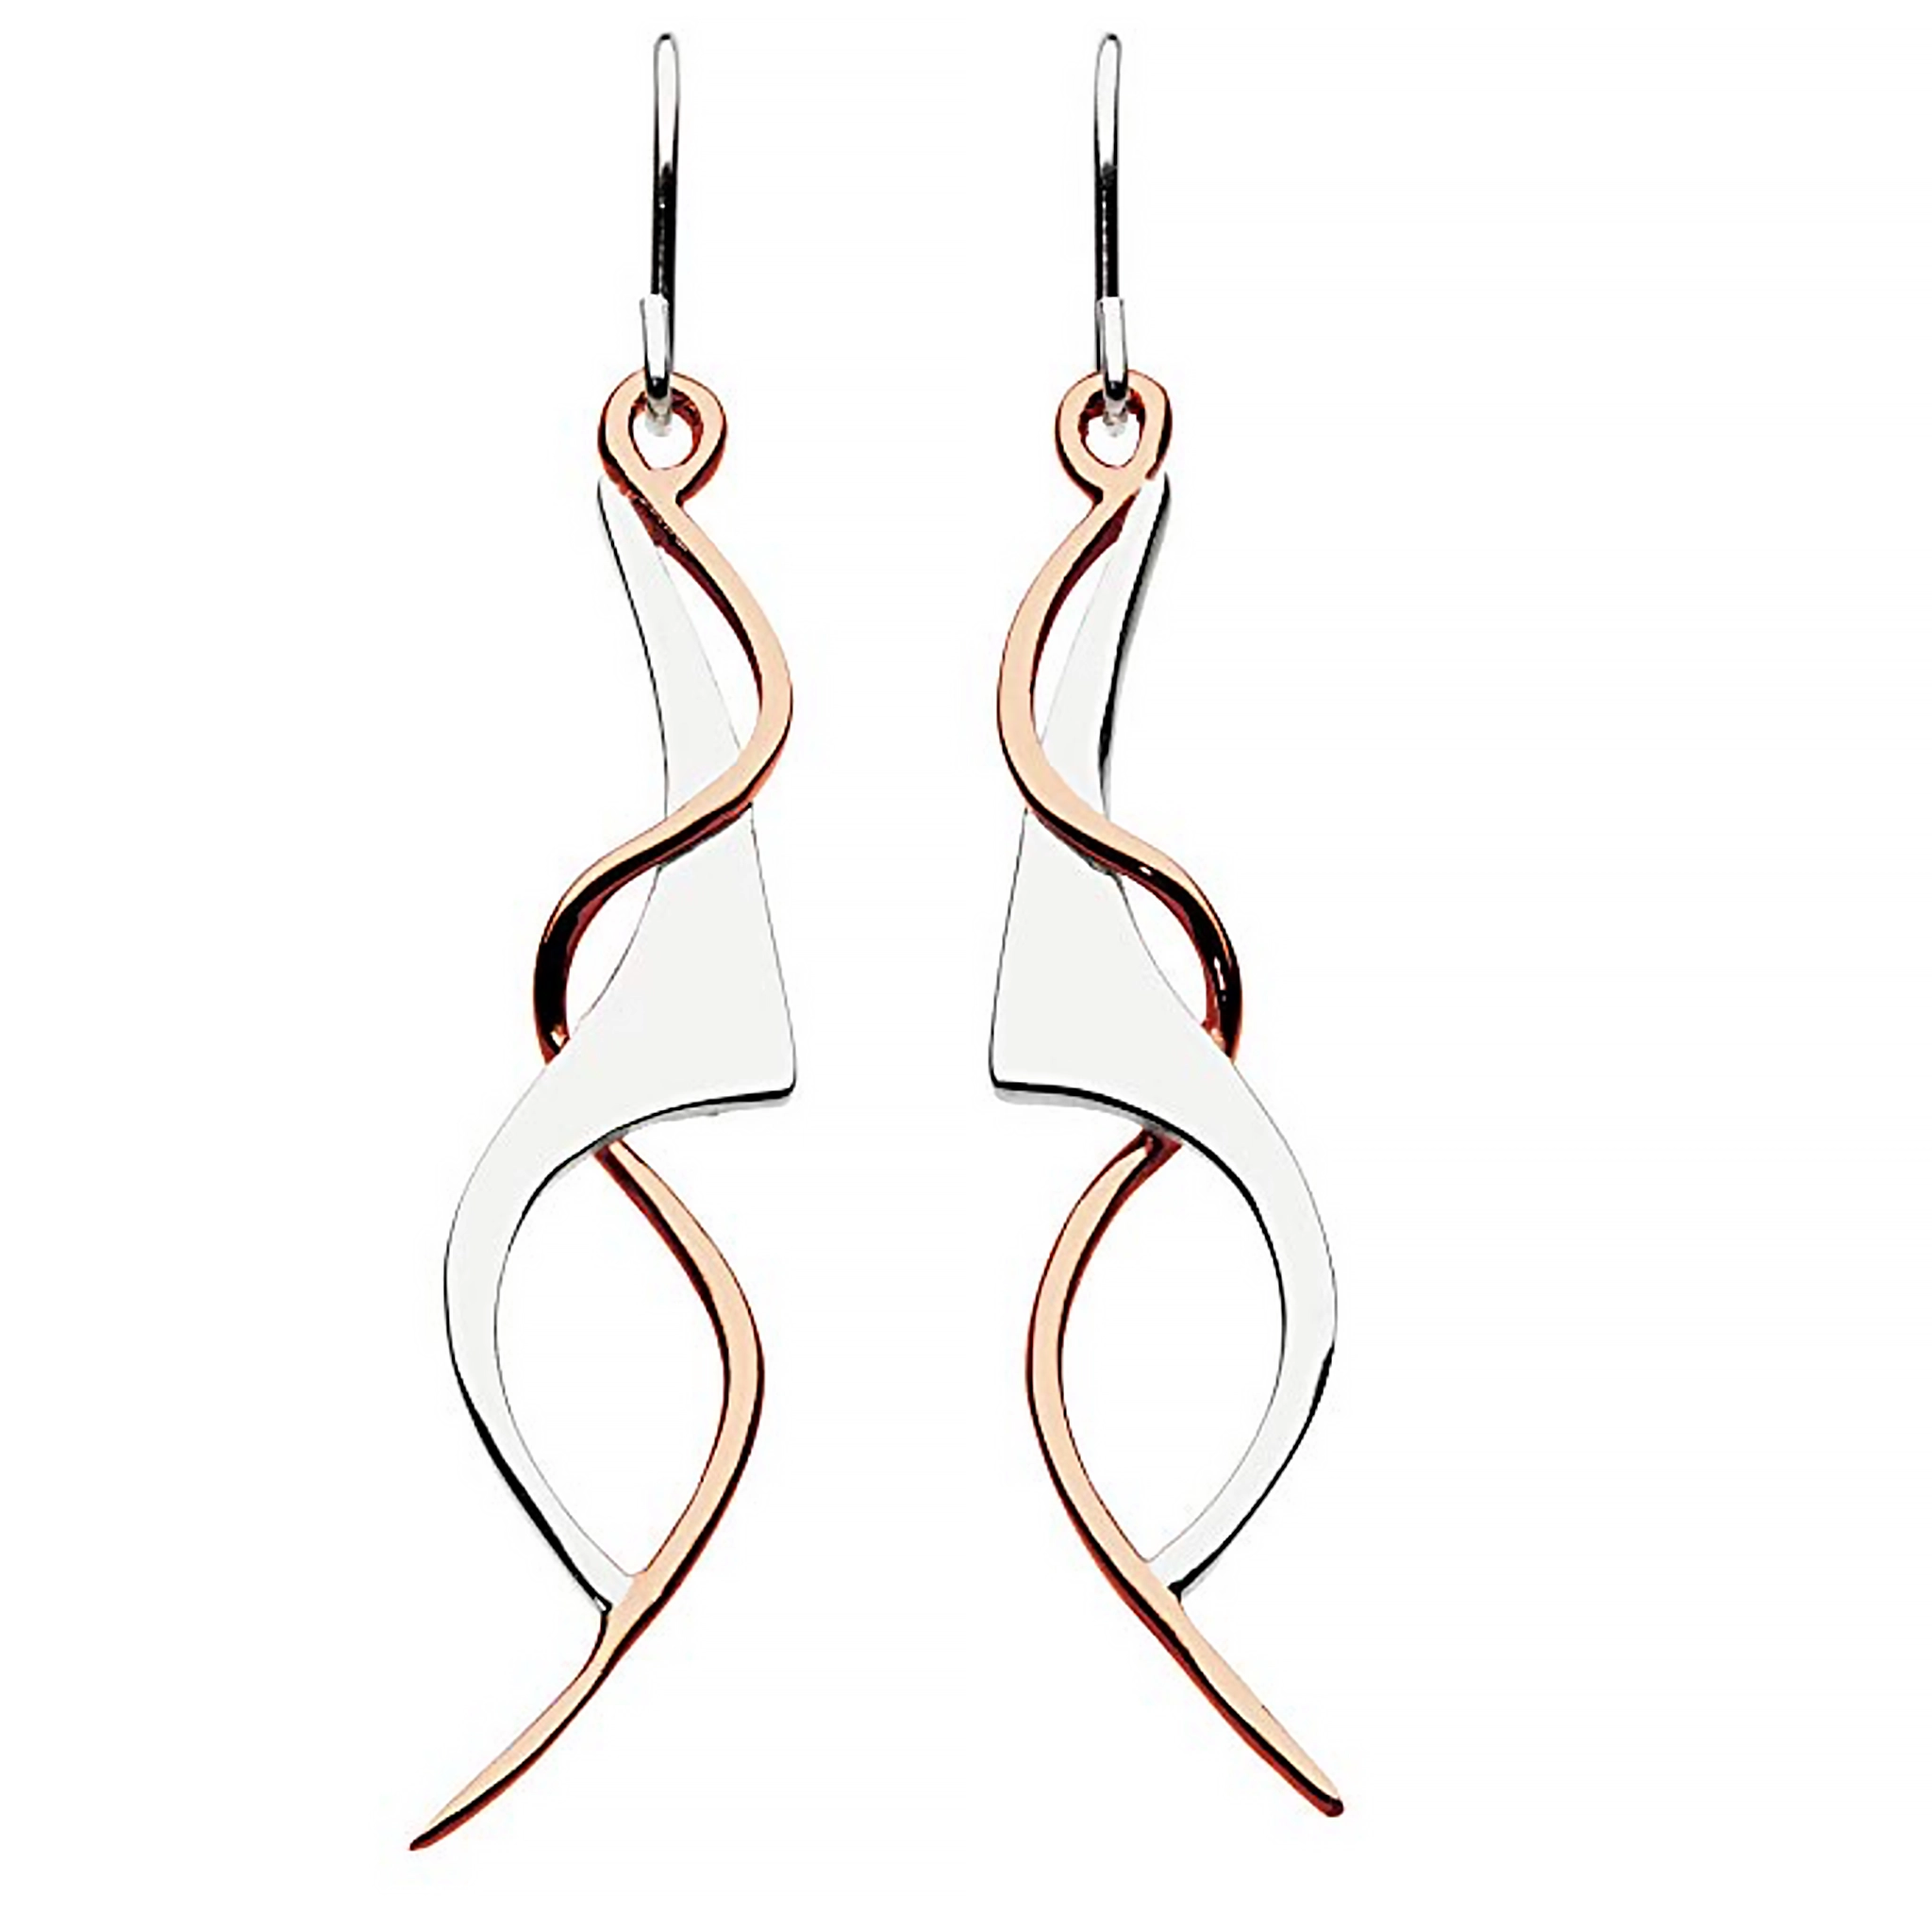 A pair of art nouveau style drop earrings with a rose gold twist detail on polished silver